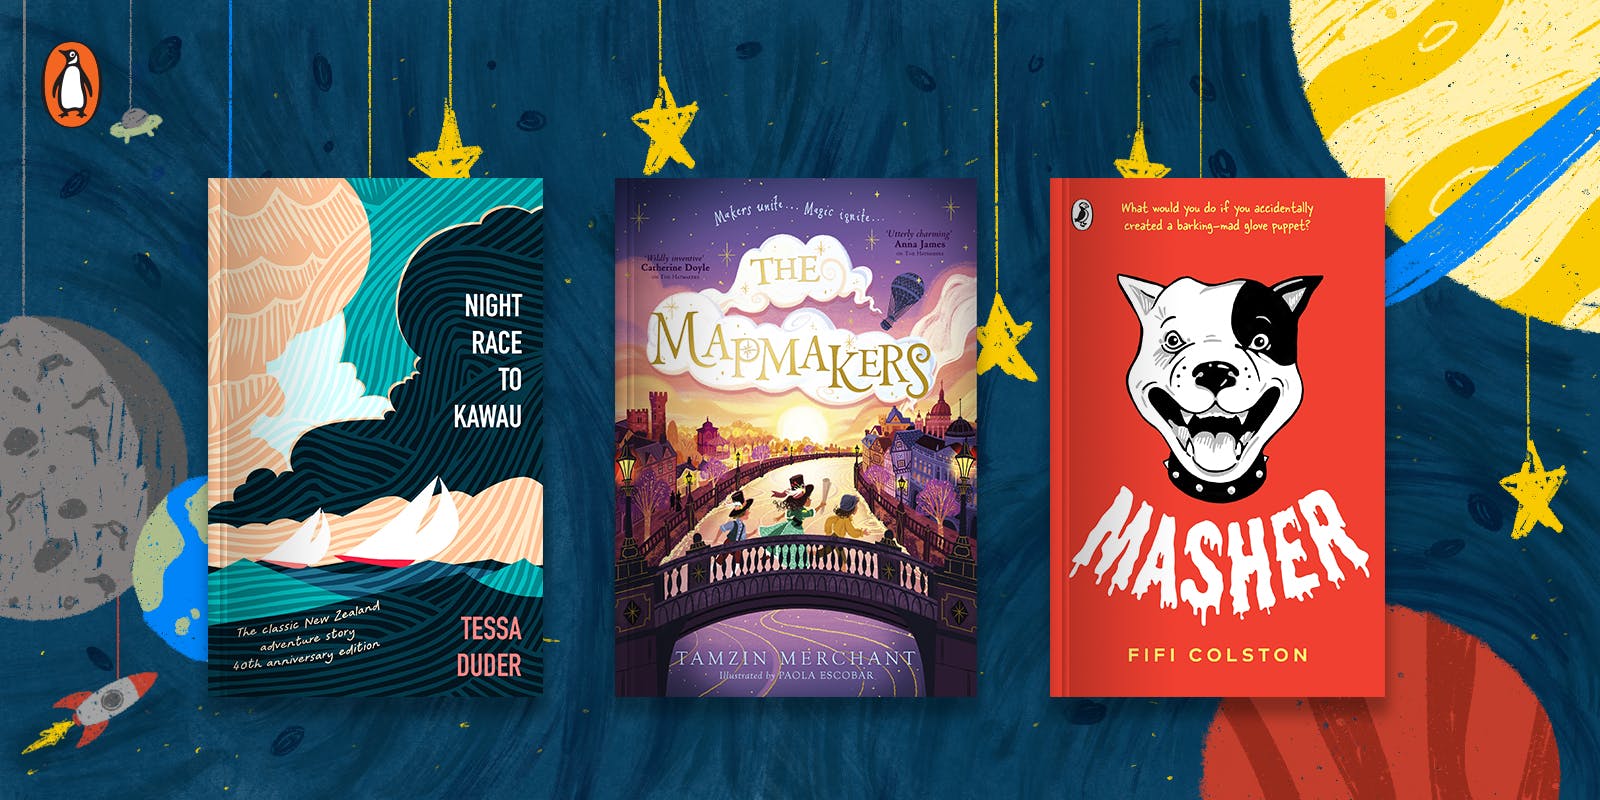 5 intermediate books we're looking forward to this year